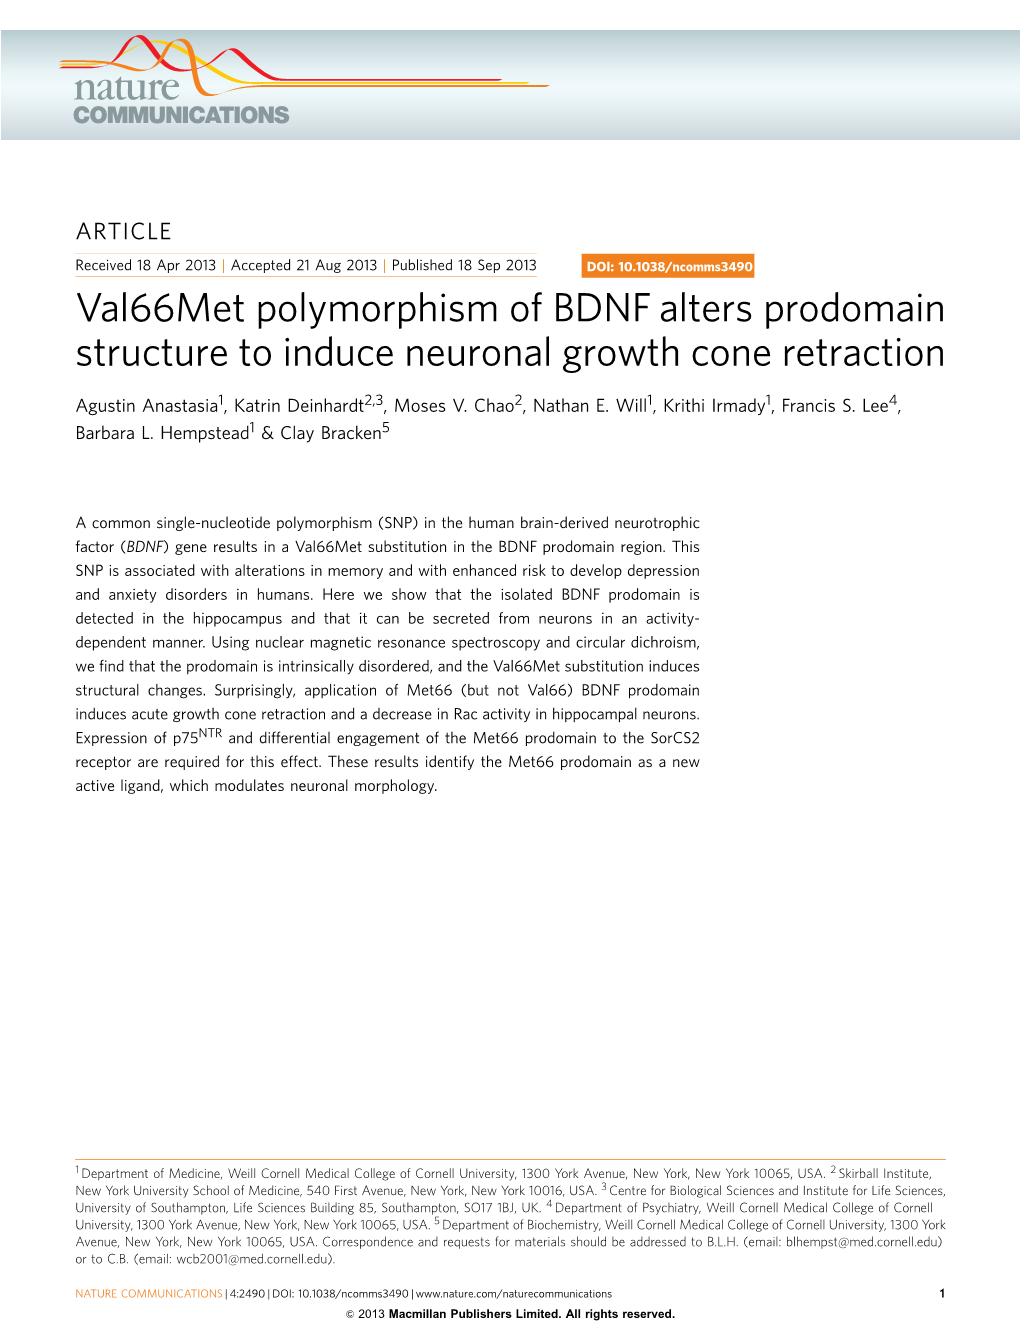 Val66met Polymorphism of BDNF Alters Prodomain Structure to Induce Neuronal Growth Cone Retraction